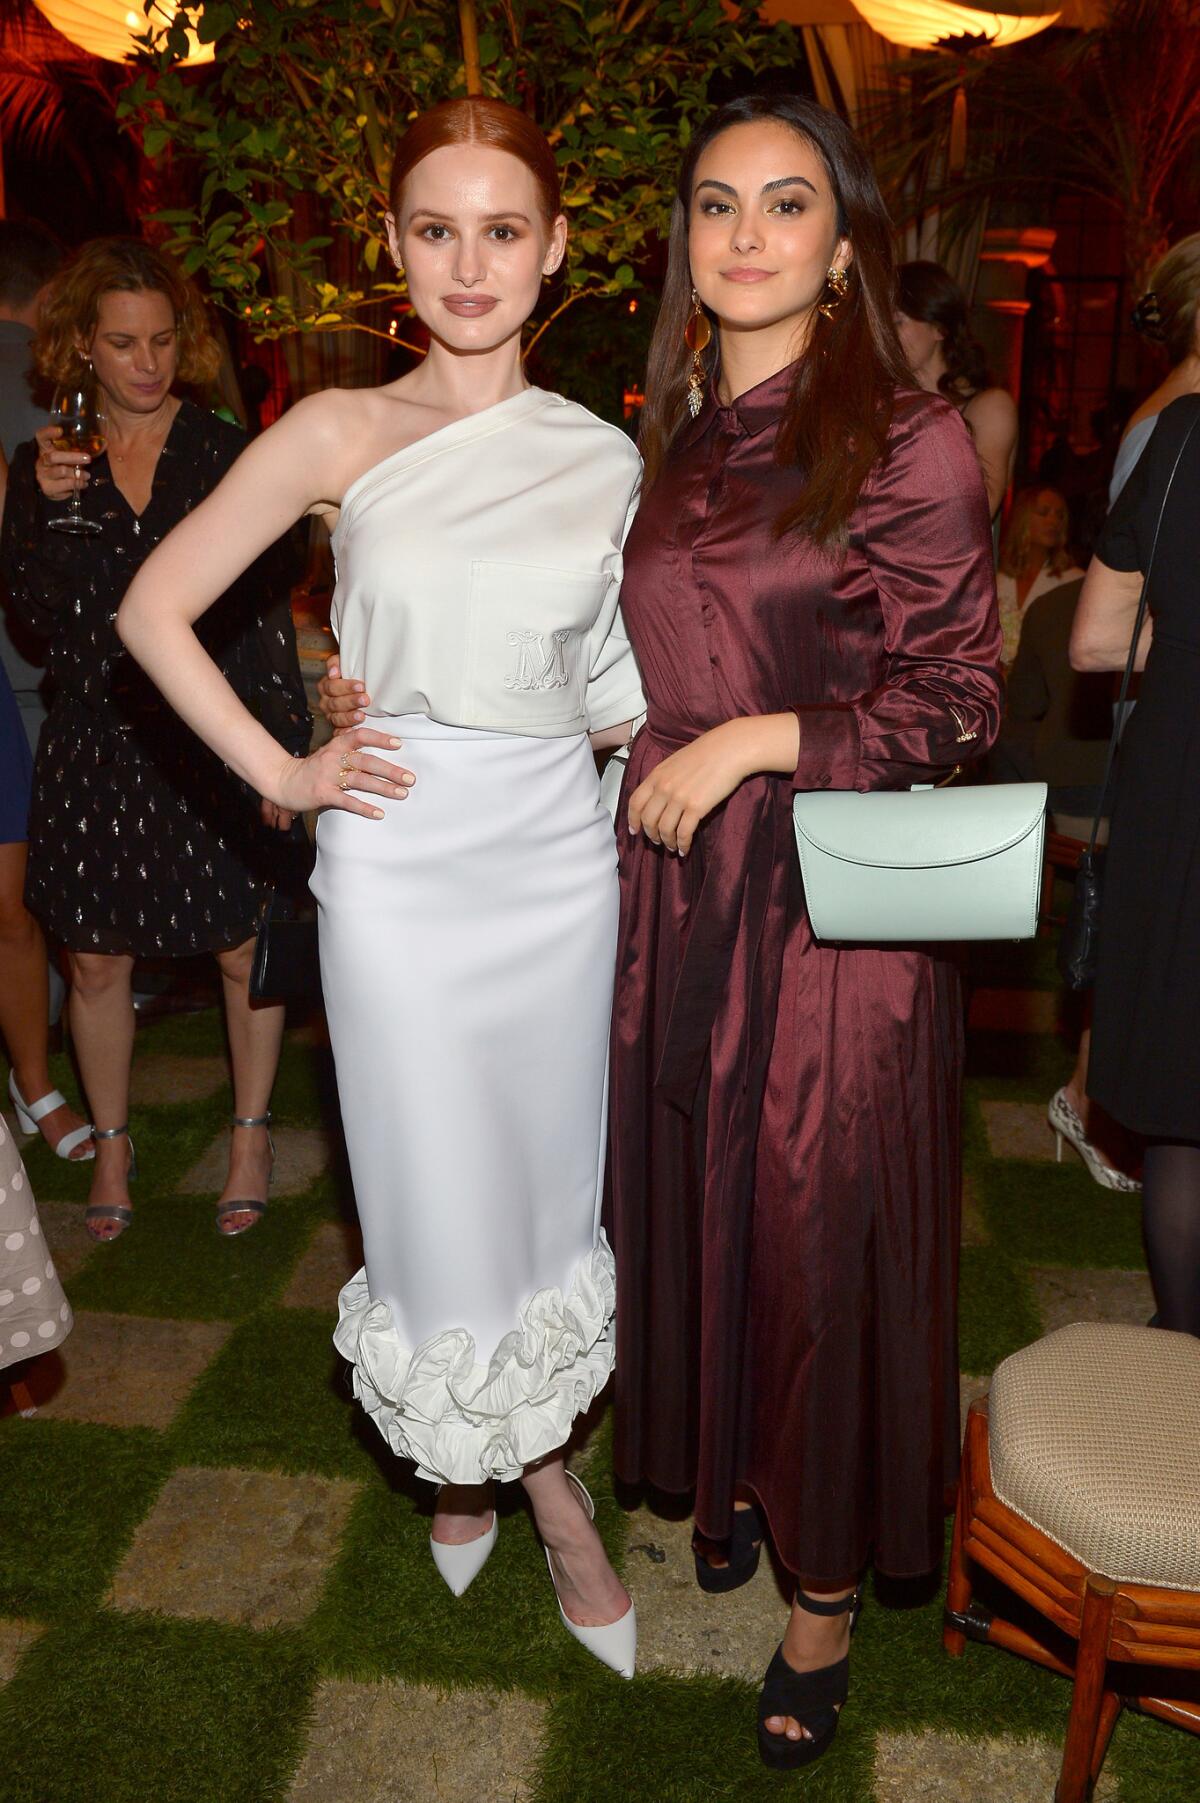 Madelaine Petsch,left, and Camila Mendes, both in Max Mara, attend the Women in Film Max Mara Face of the Future cocktail party celebrating honoree Elizabeth Debicki.